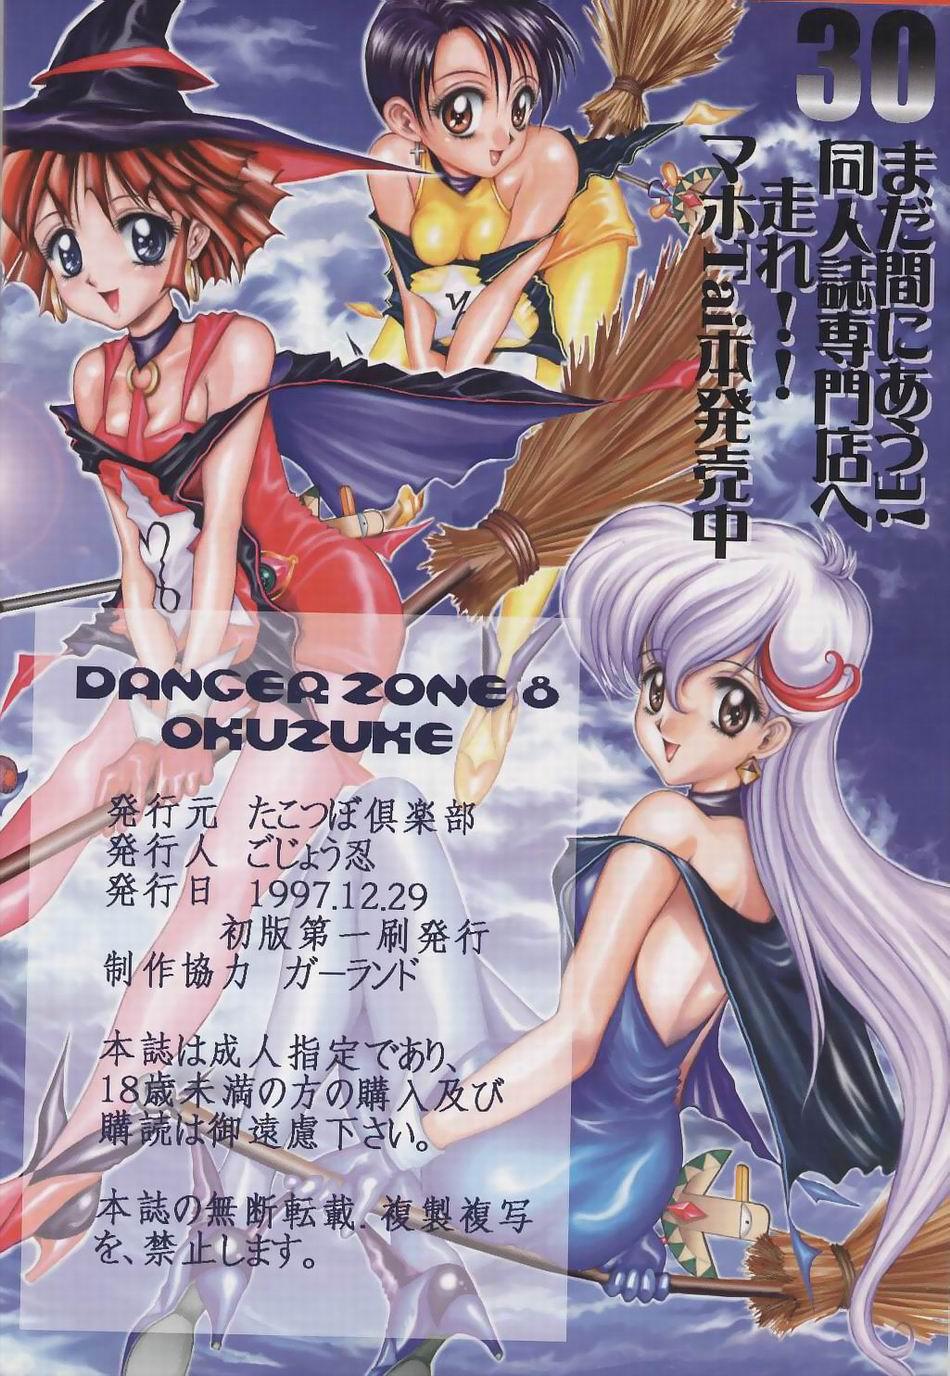 Beurette BEST OF DANGER ZONE 8 - Gaogaigar Strapon - Page 29